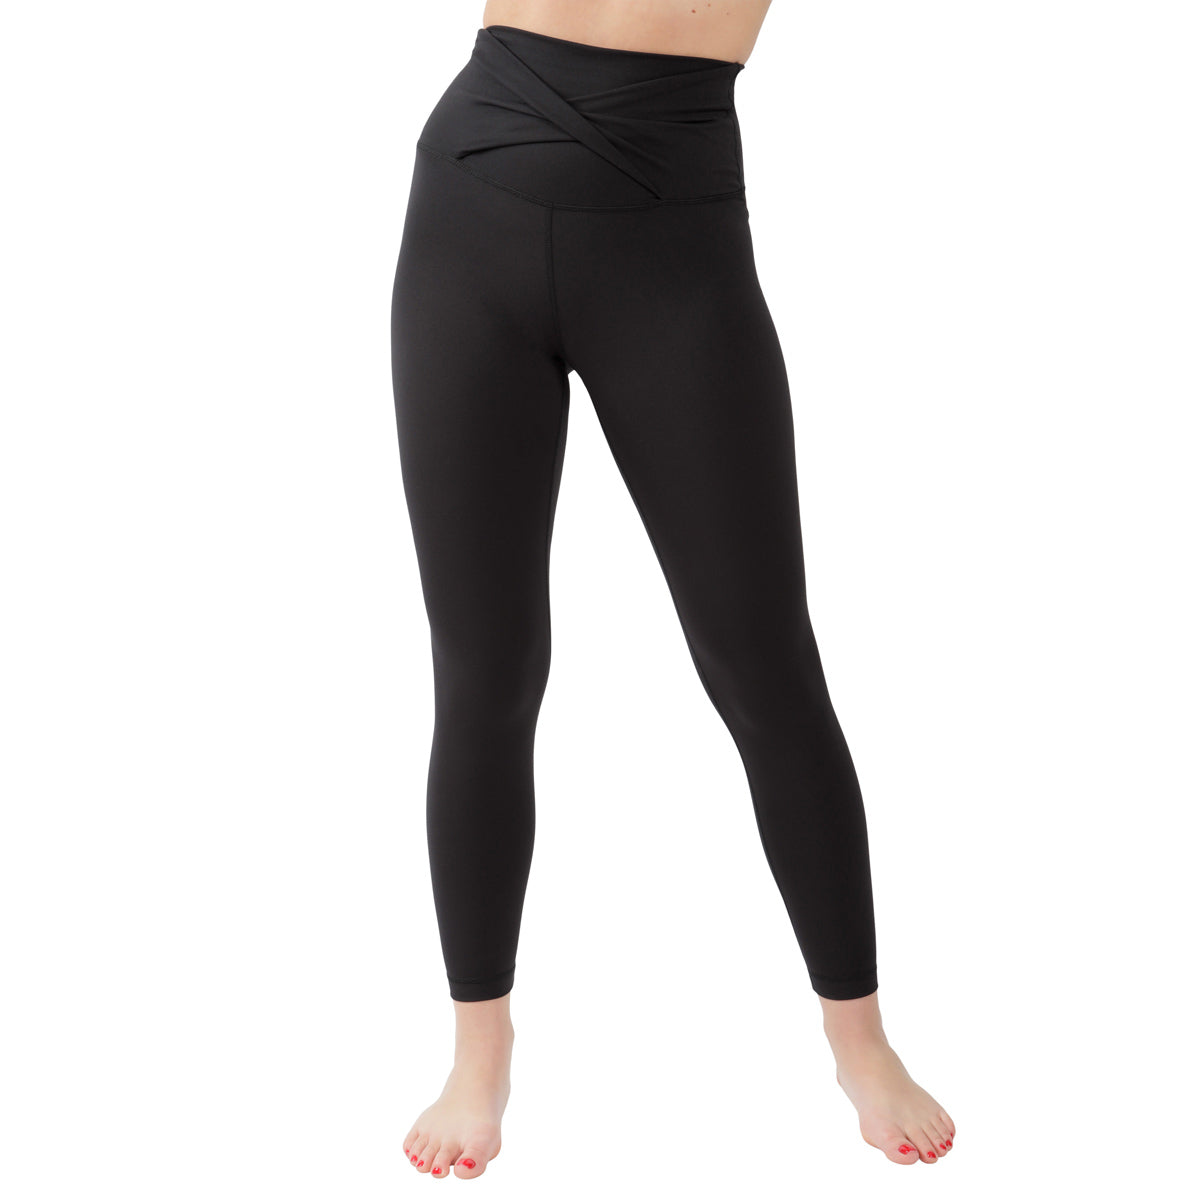 Yogalicious by Reflex Women's Lux Super High Rise Ankle Leggings with